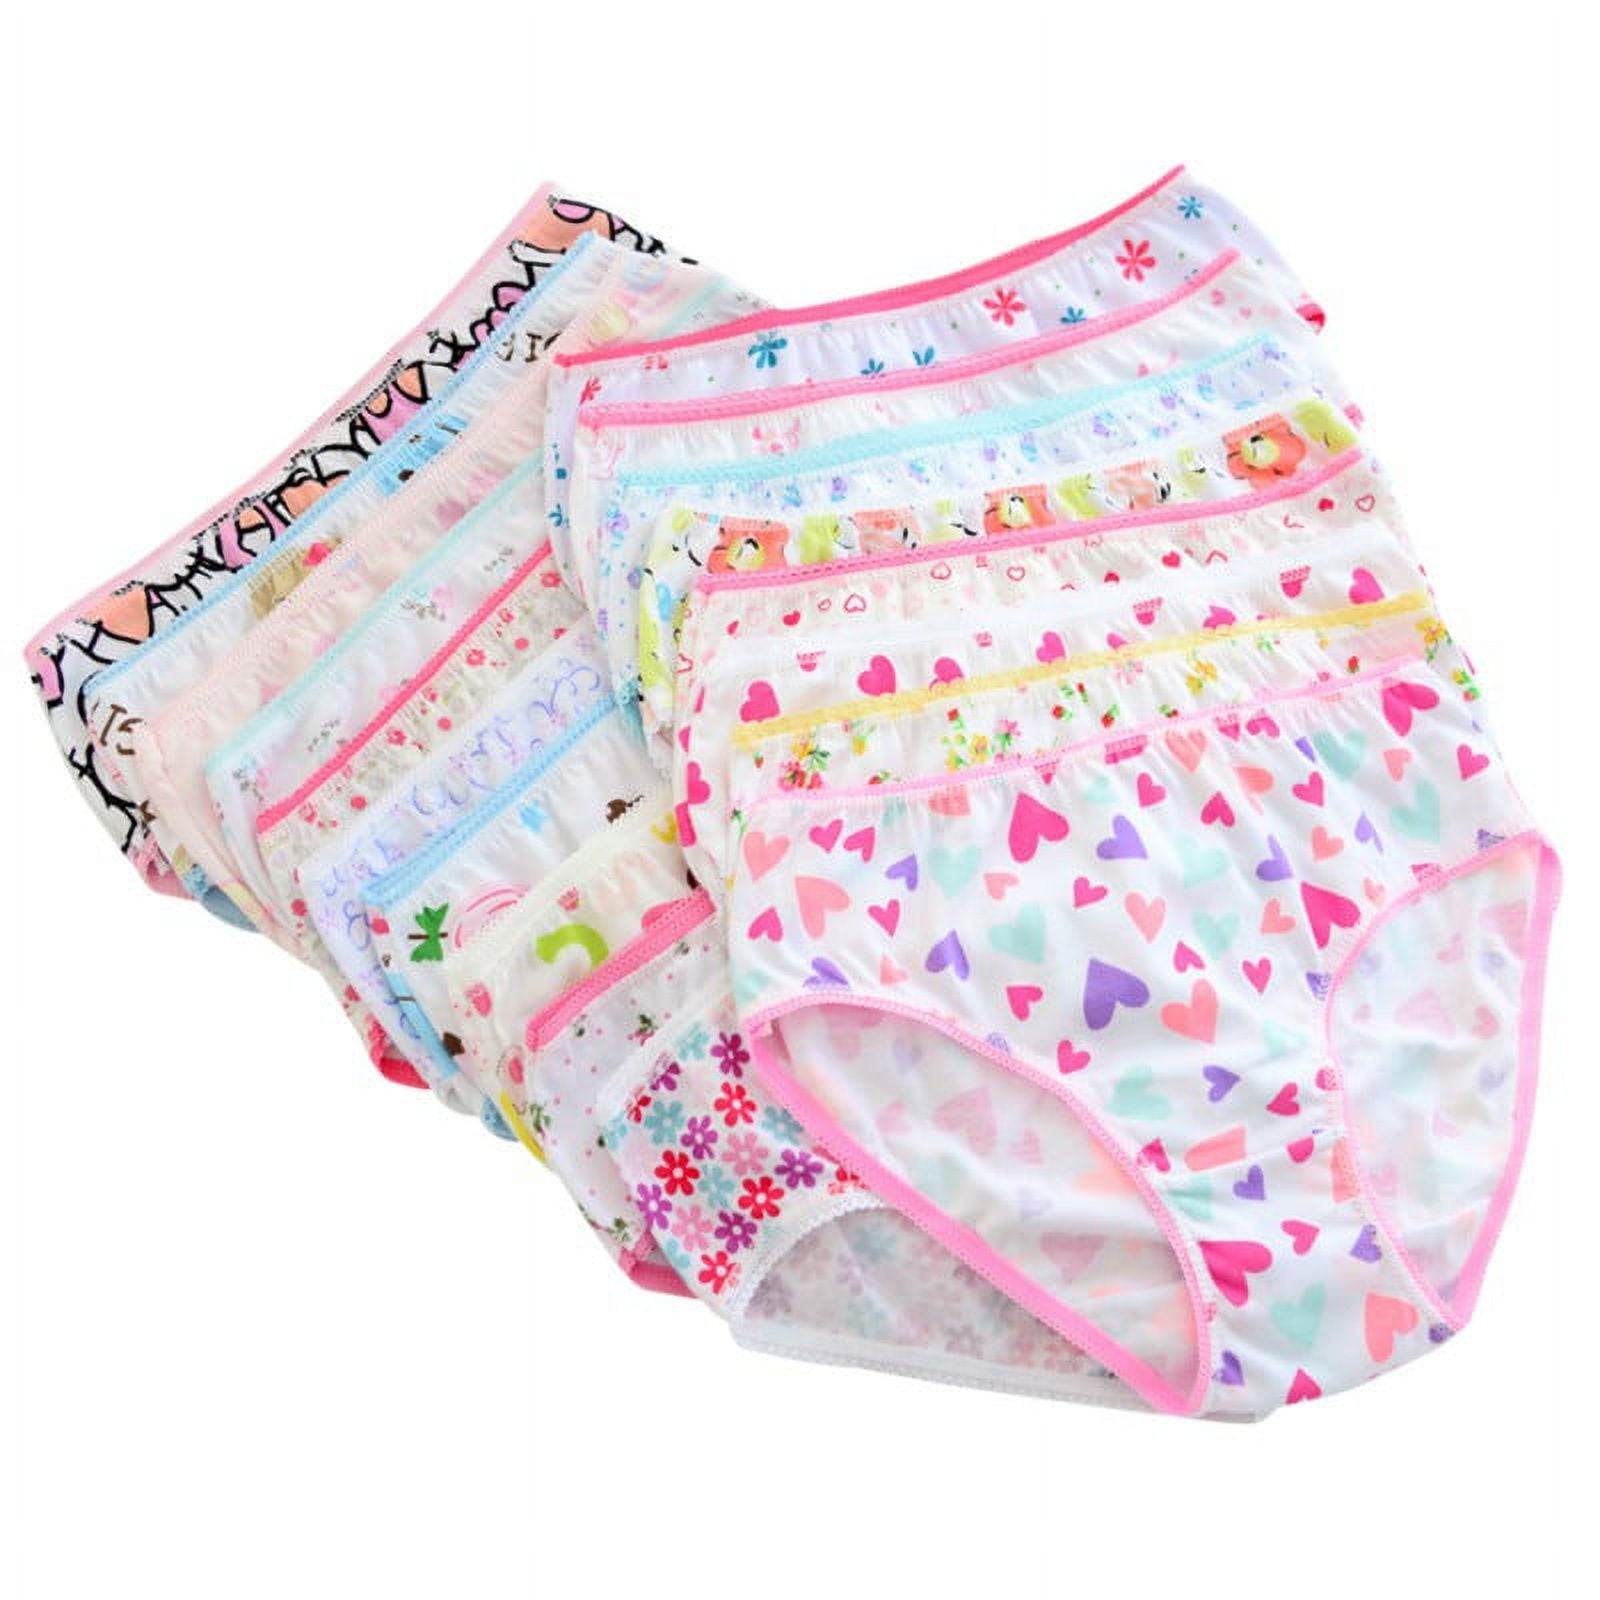 3pc Girls Cotton Lace Boxer Kids Underpants Children Underwear Girls Safety  Underwear Suit 210 Years Panties Color Mix Kid Size M 4 to 6 years